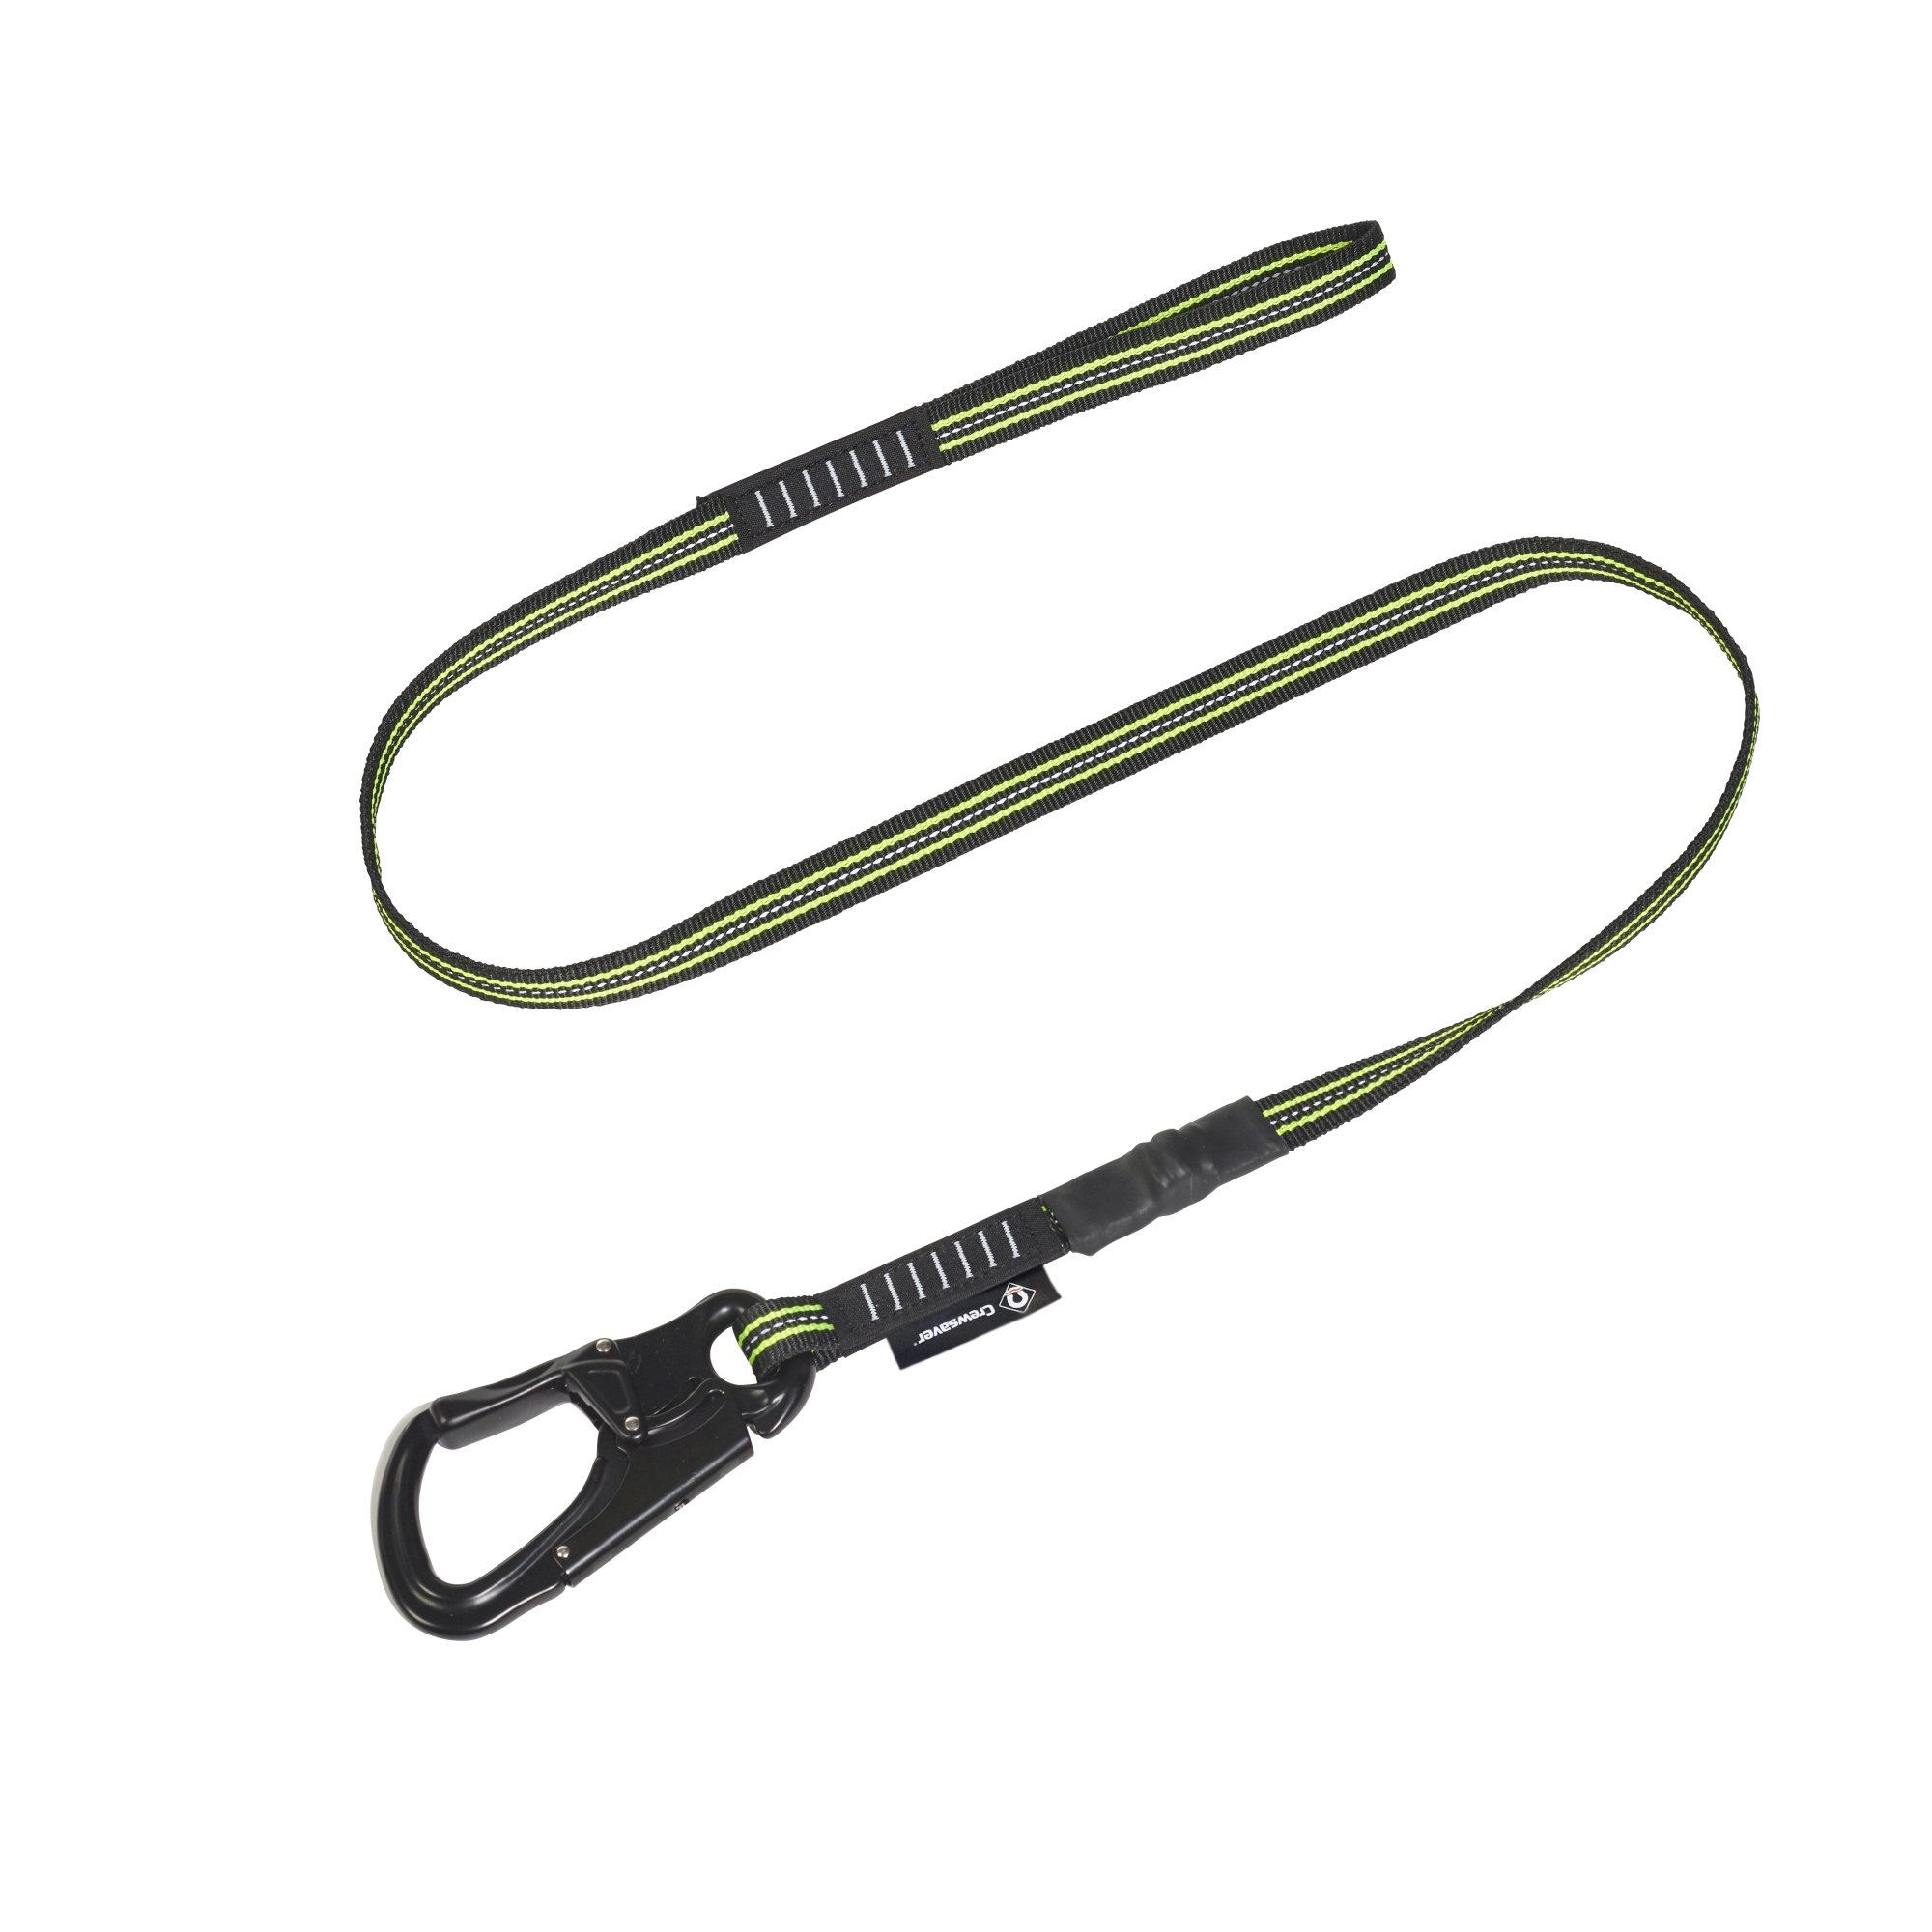 Crewline Pro Single Hook Non-elastic. - with load ind